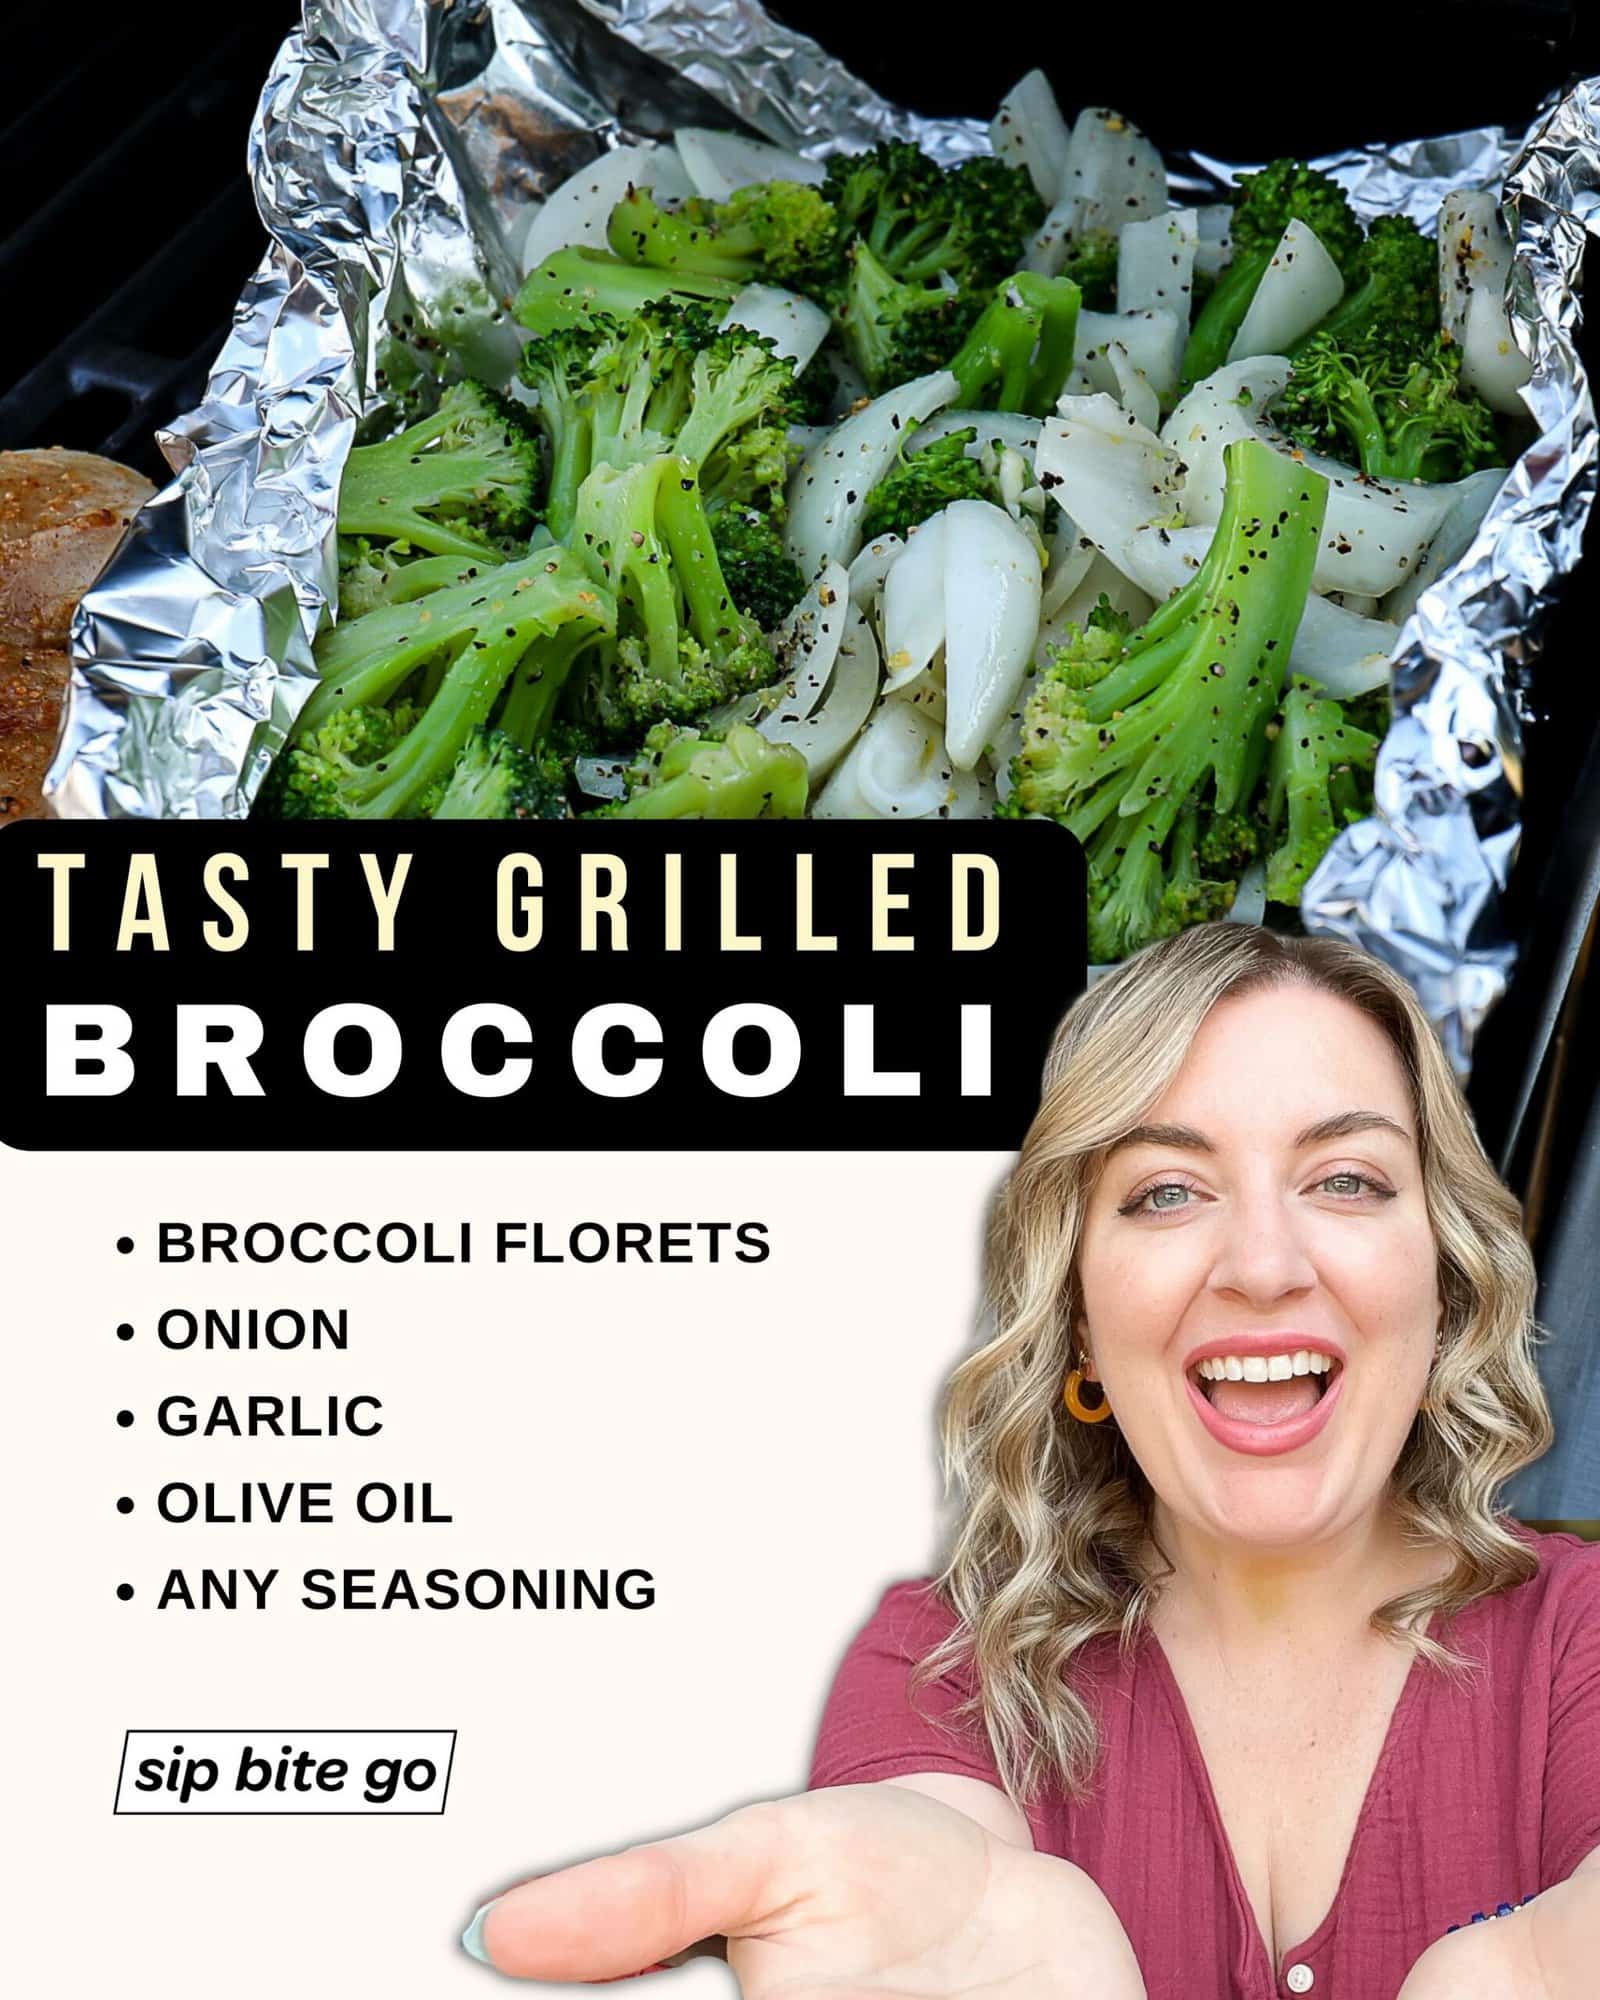 Infographic with ingredients list for grilling broccoli with onions on a gas grill with food blogger Jenna Passaro from Sip Bite Go